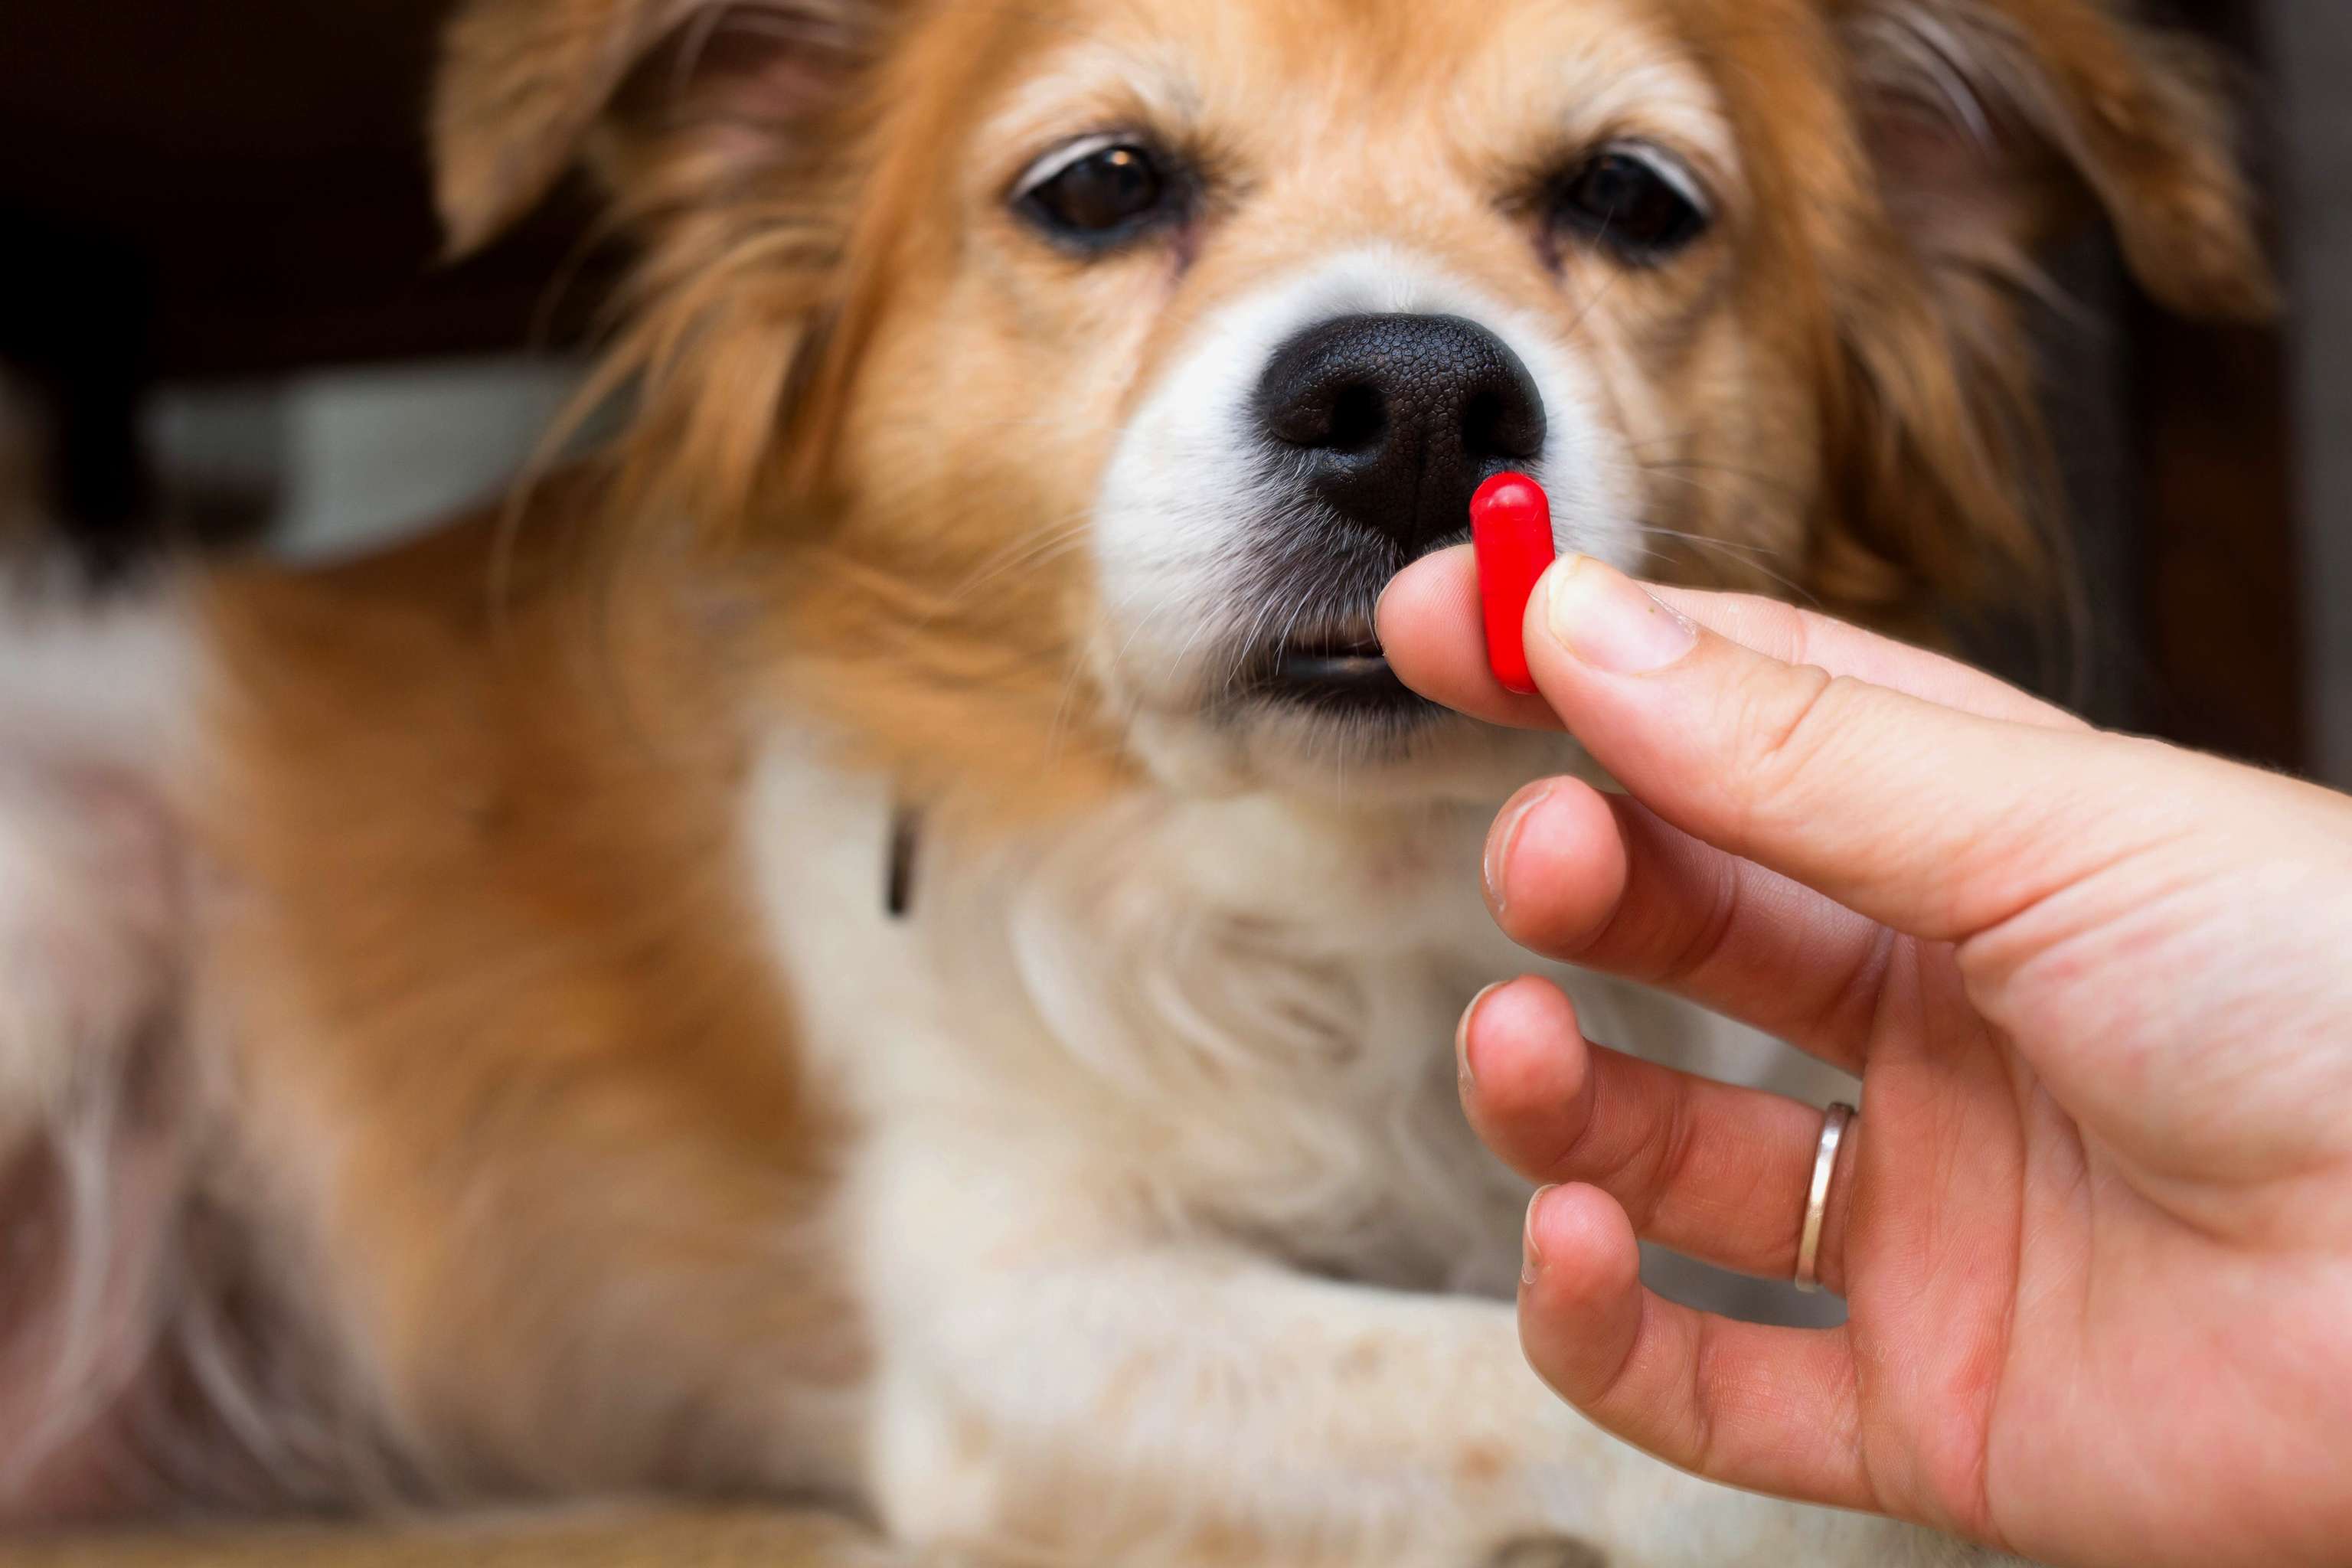 Medication for four paws